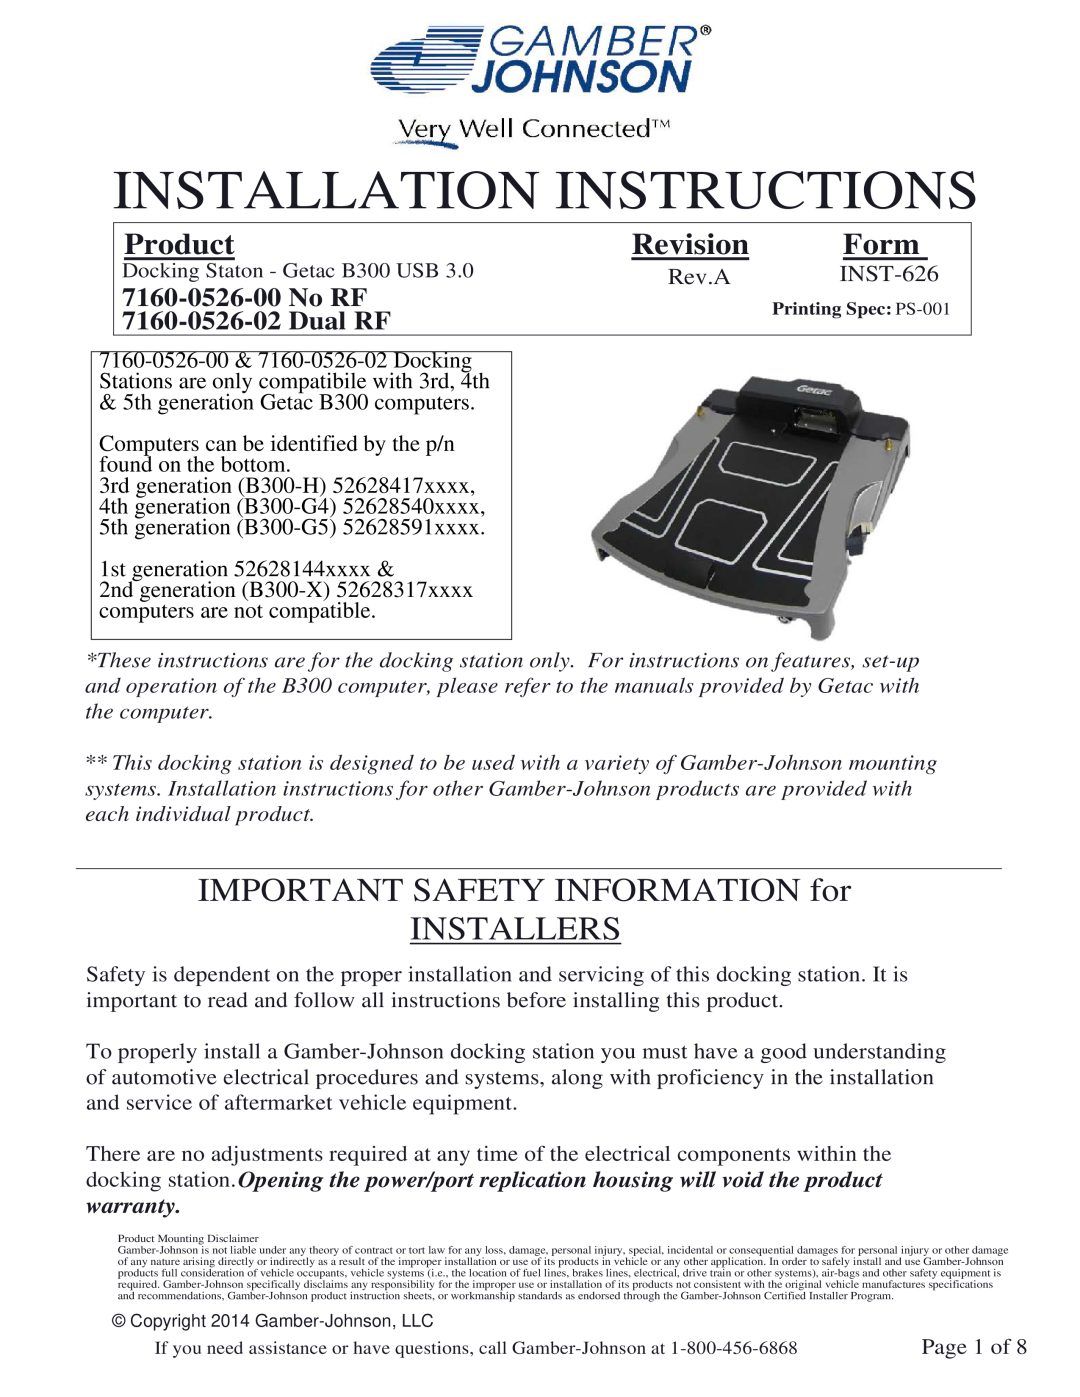 Gamber Johnson 7160-0526-00 installation instructions IMPORTANT SAFETY INFORMATION for INSTALLERS, Product, Revision, Form 